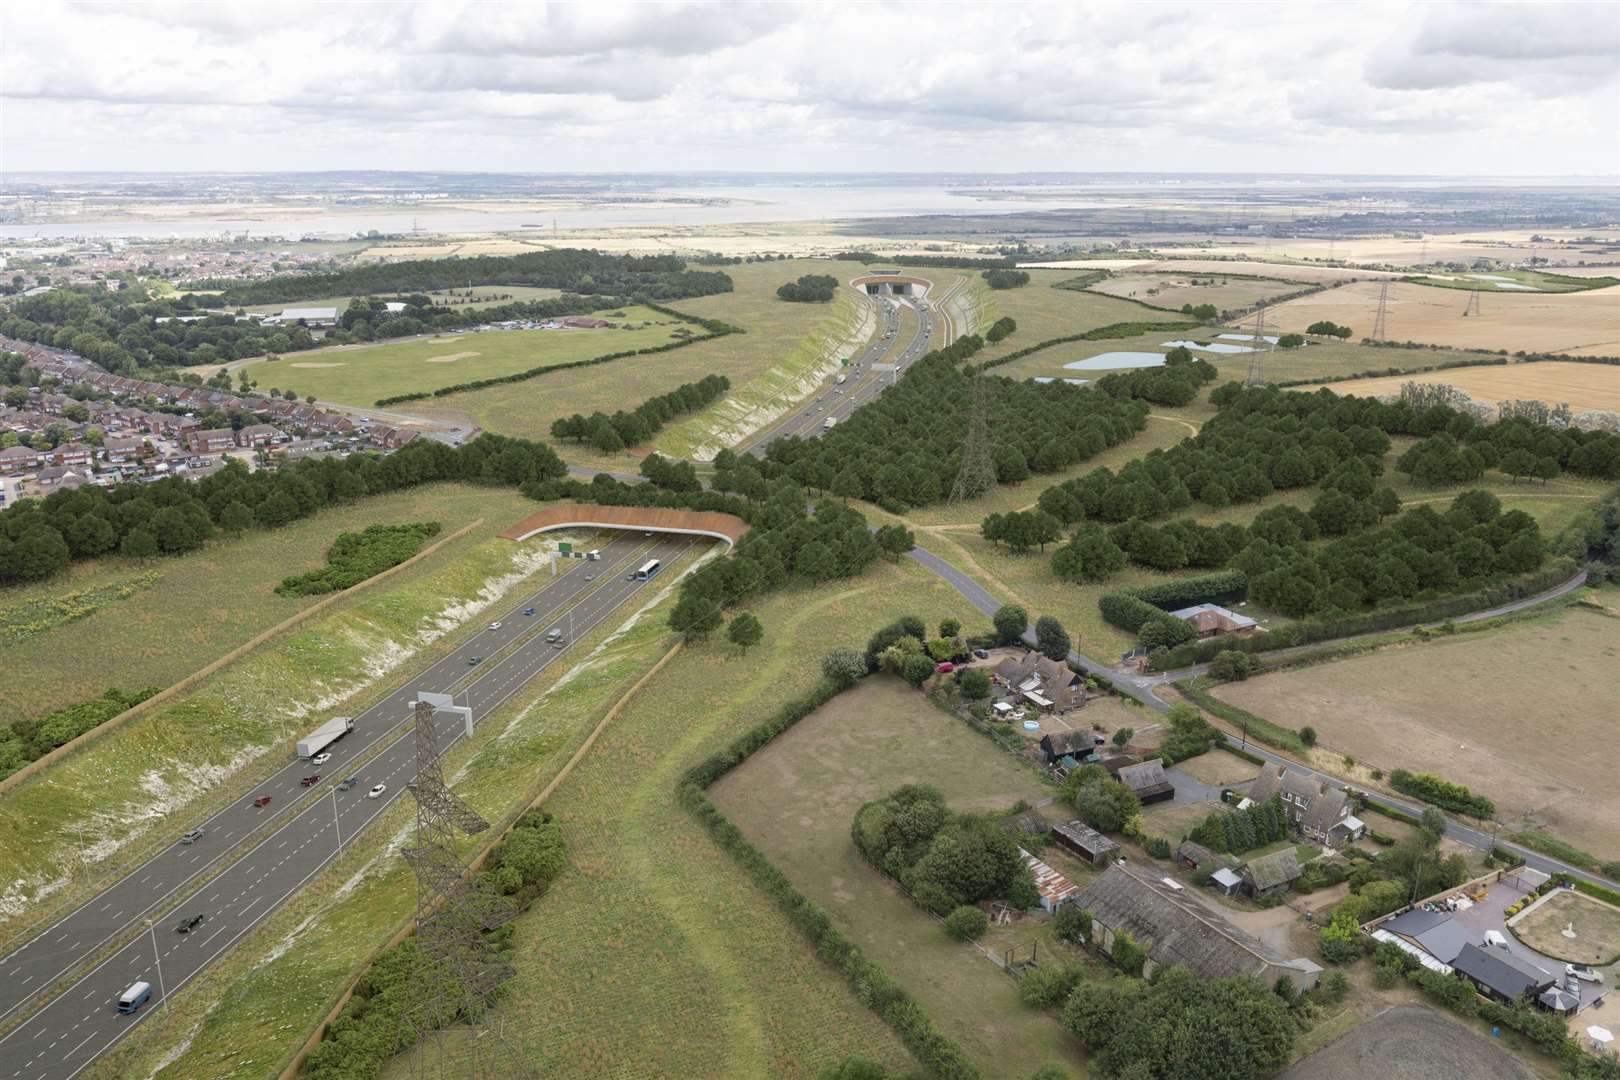 The green bridge proposed at Thong Lane. Image from Highways England